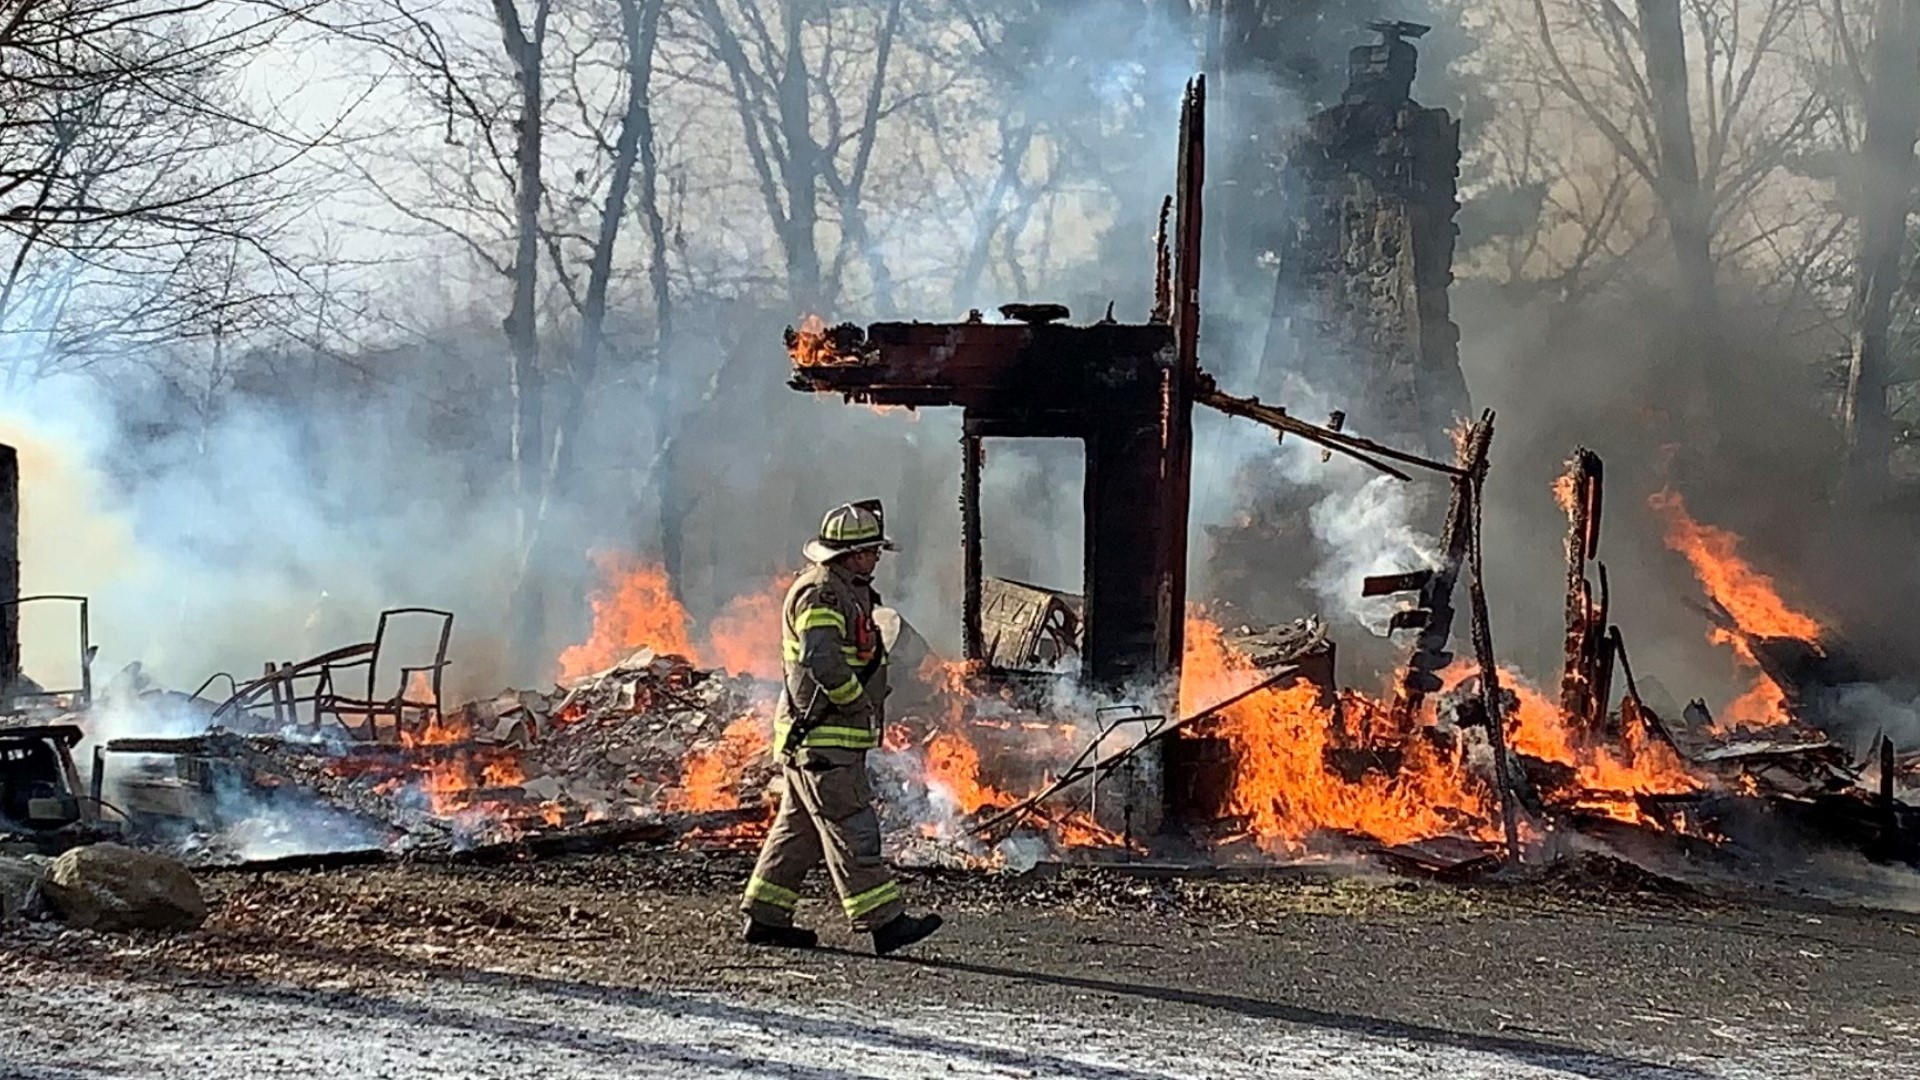 The blaze broke out on Temperance Hill in Plymouth Township Friday morning.